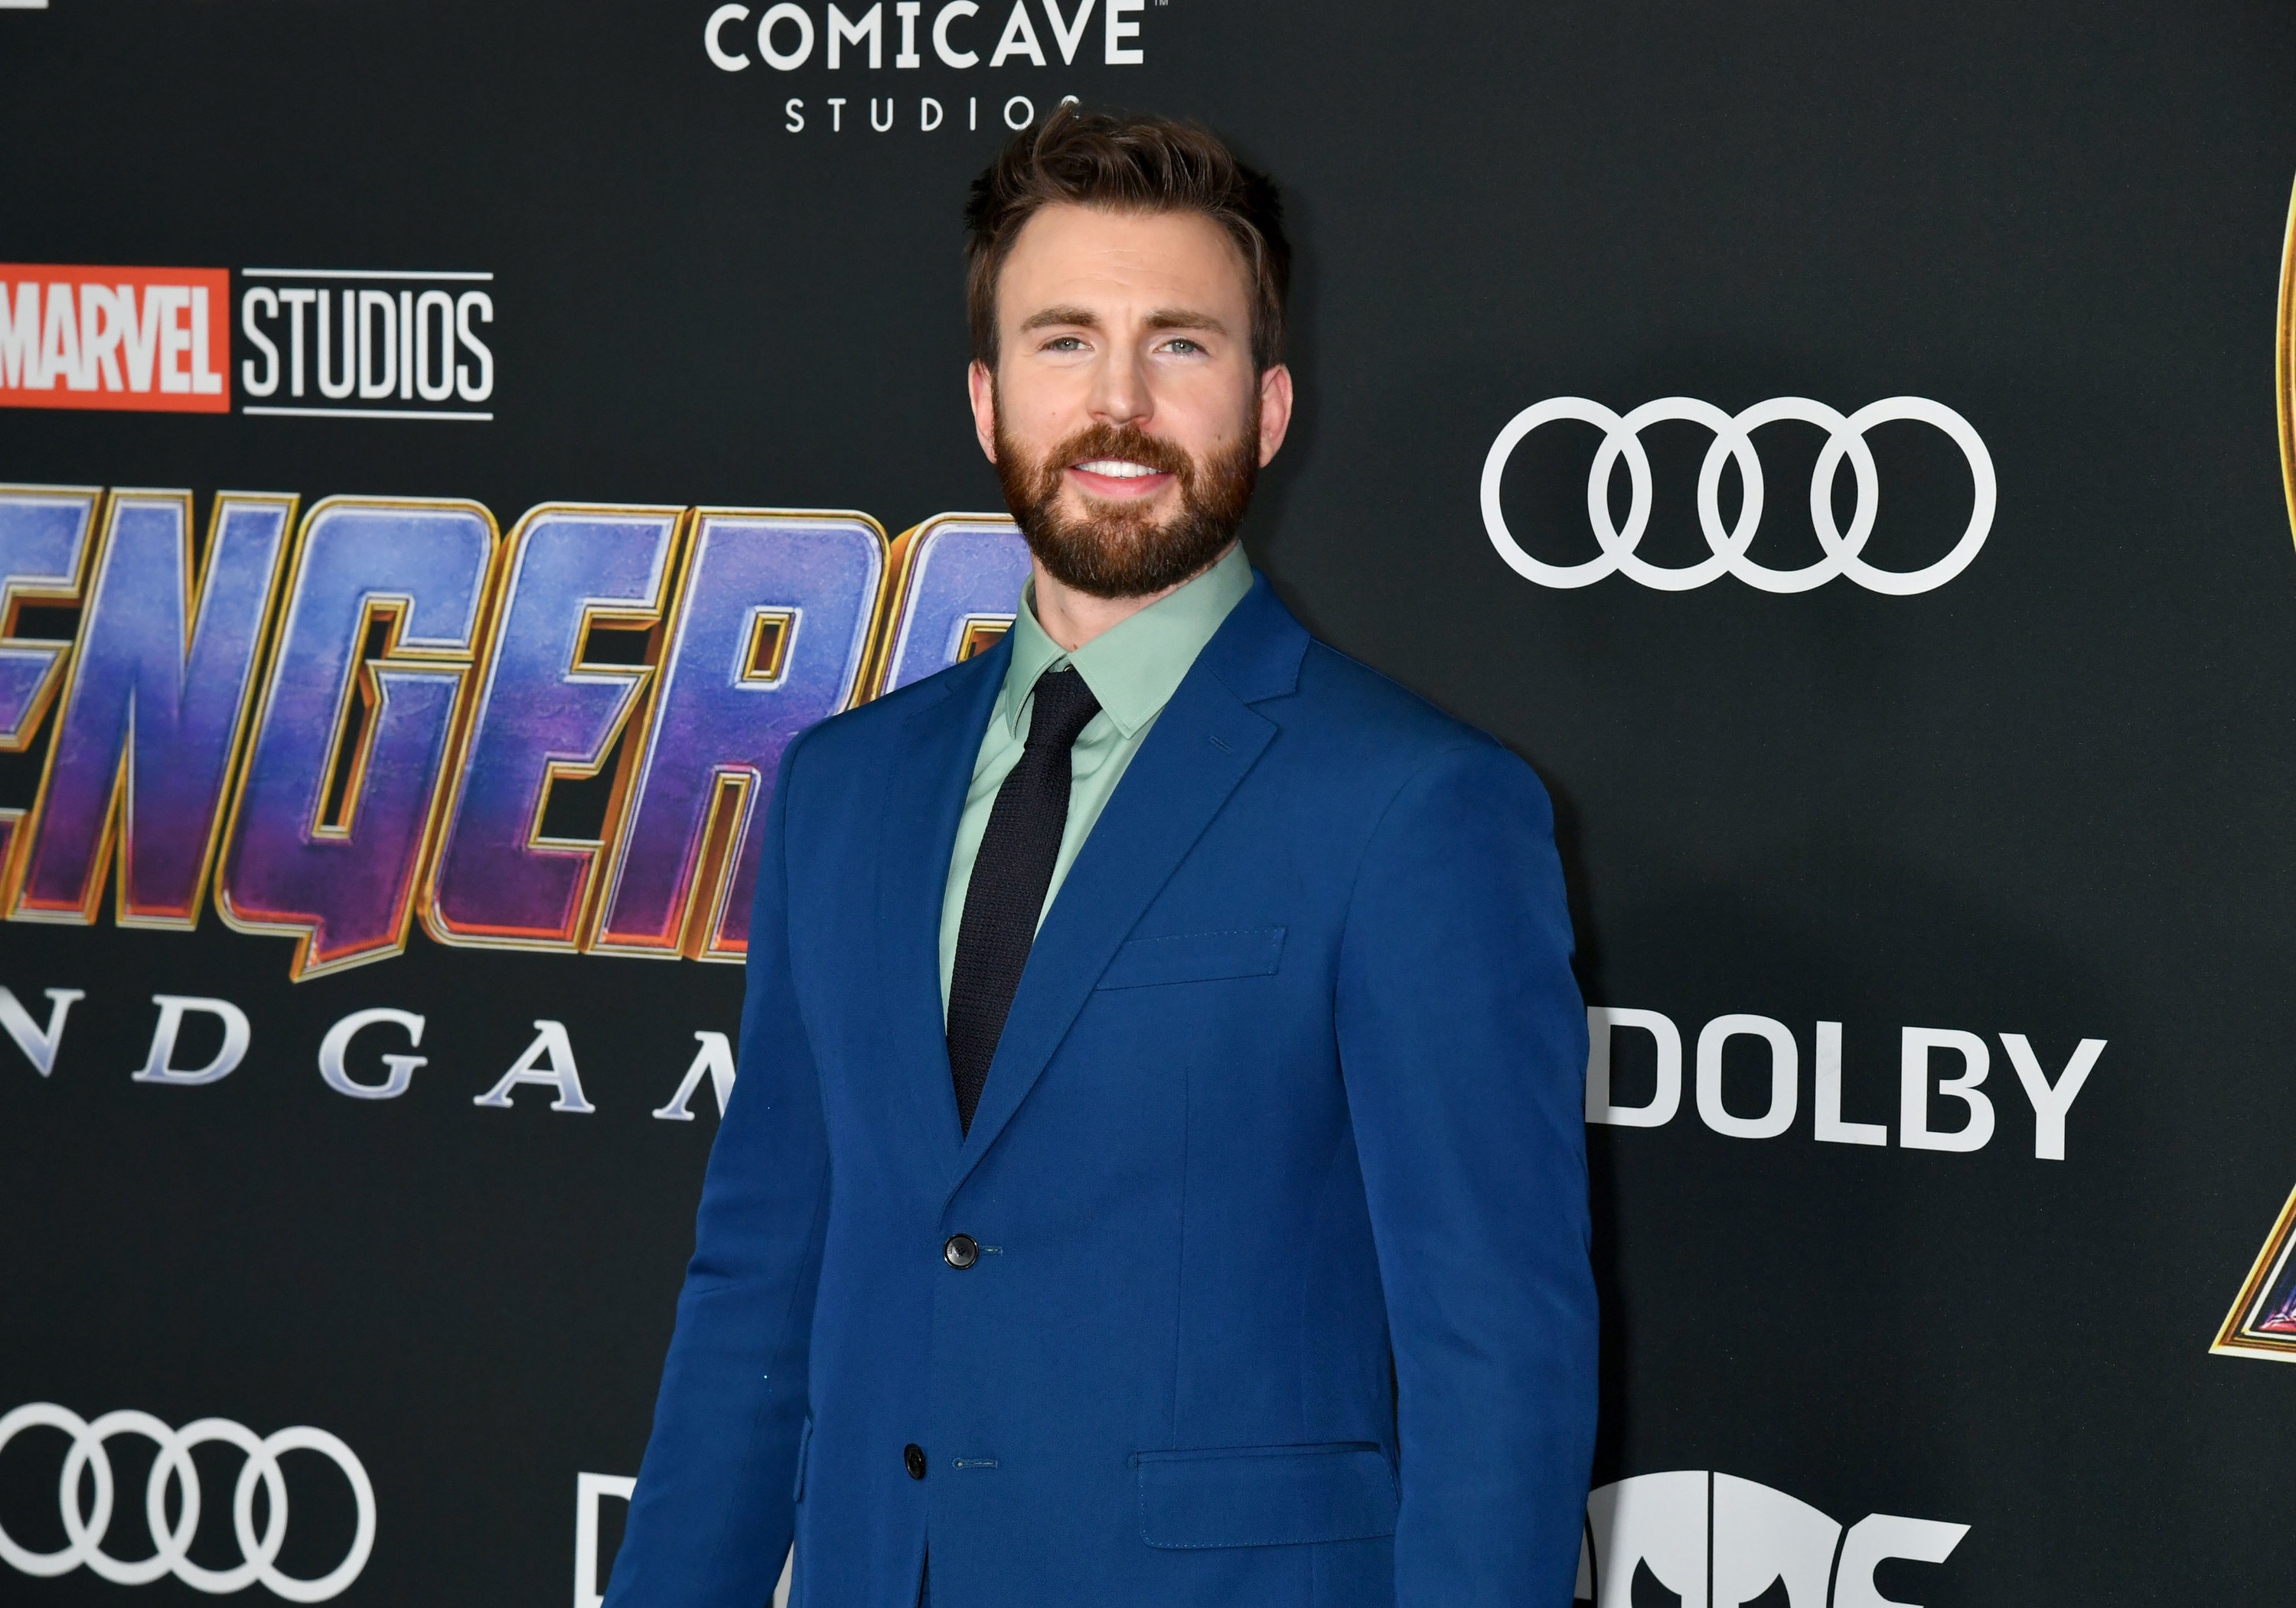 Chris smiling, wearing a blue suit, at the Avengers Endgame premiere